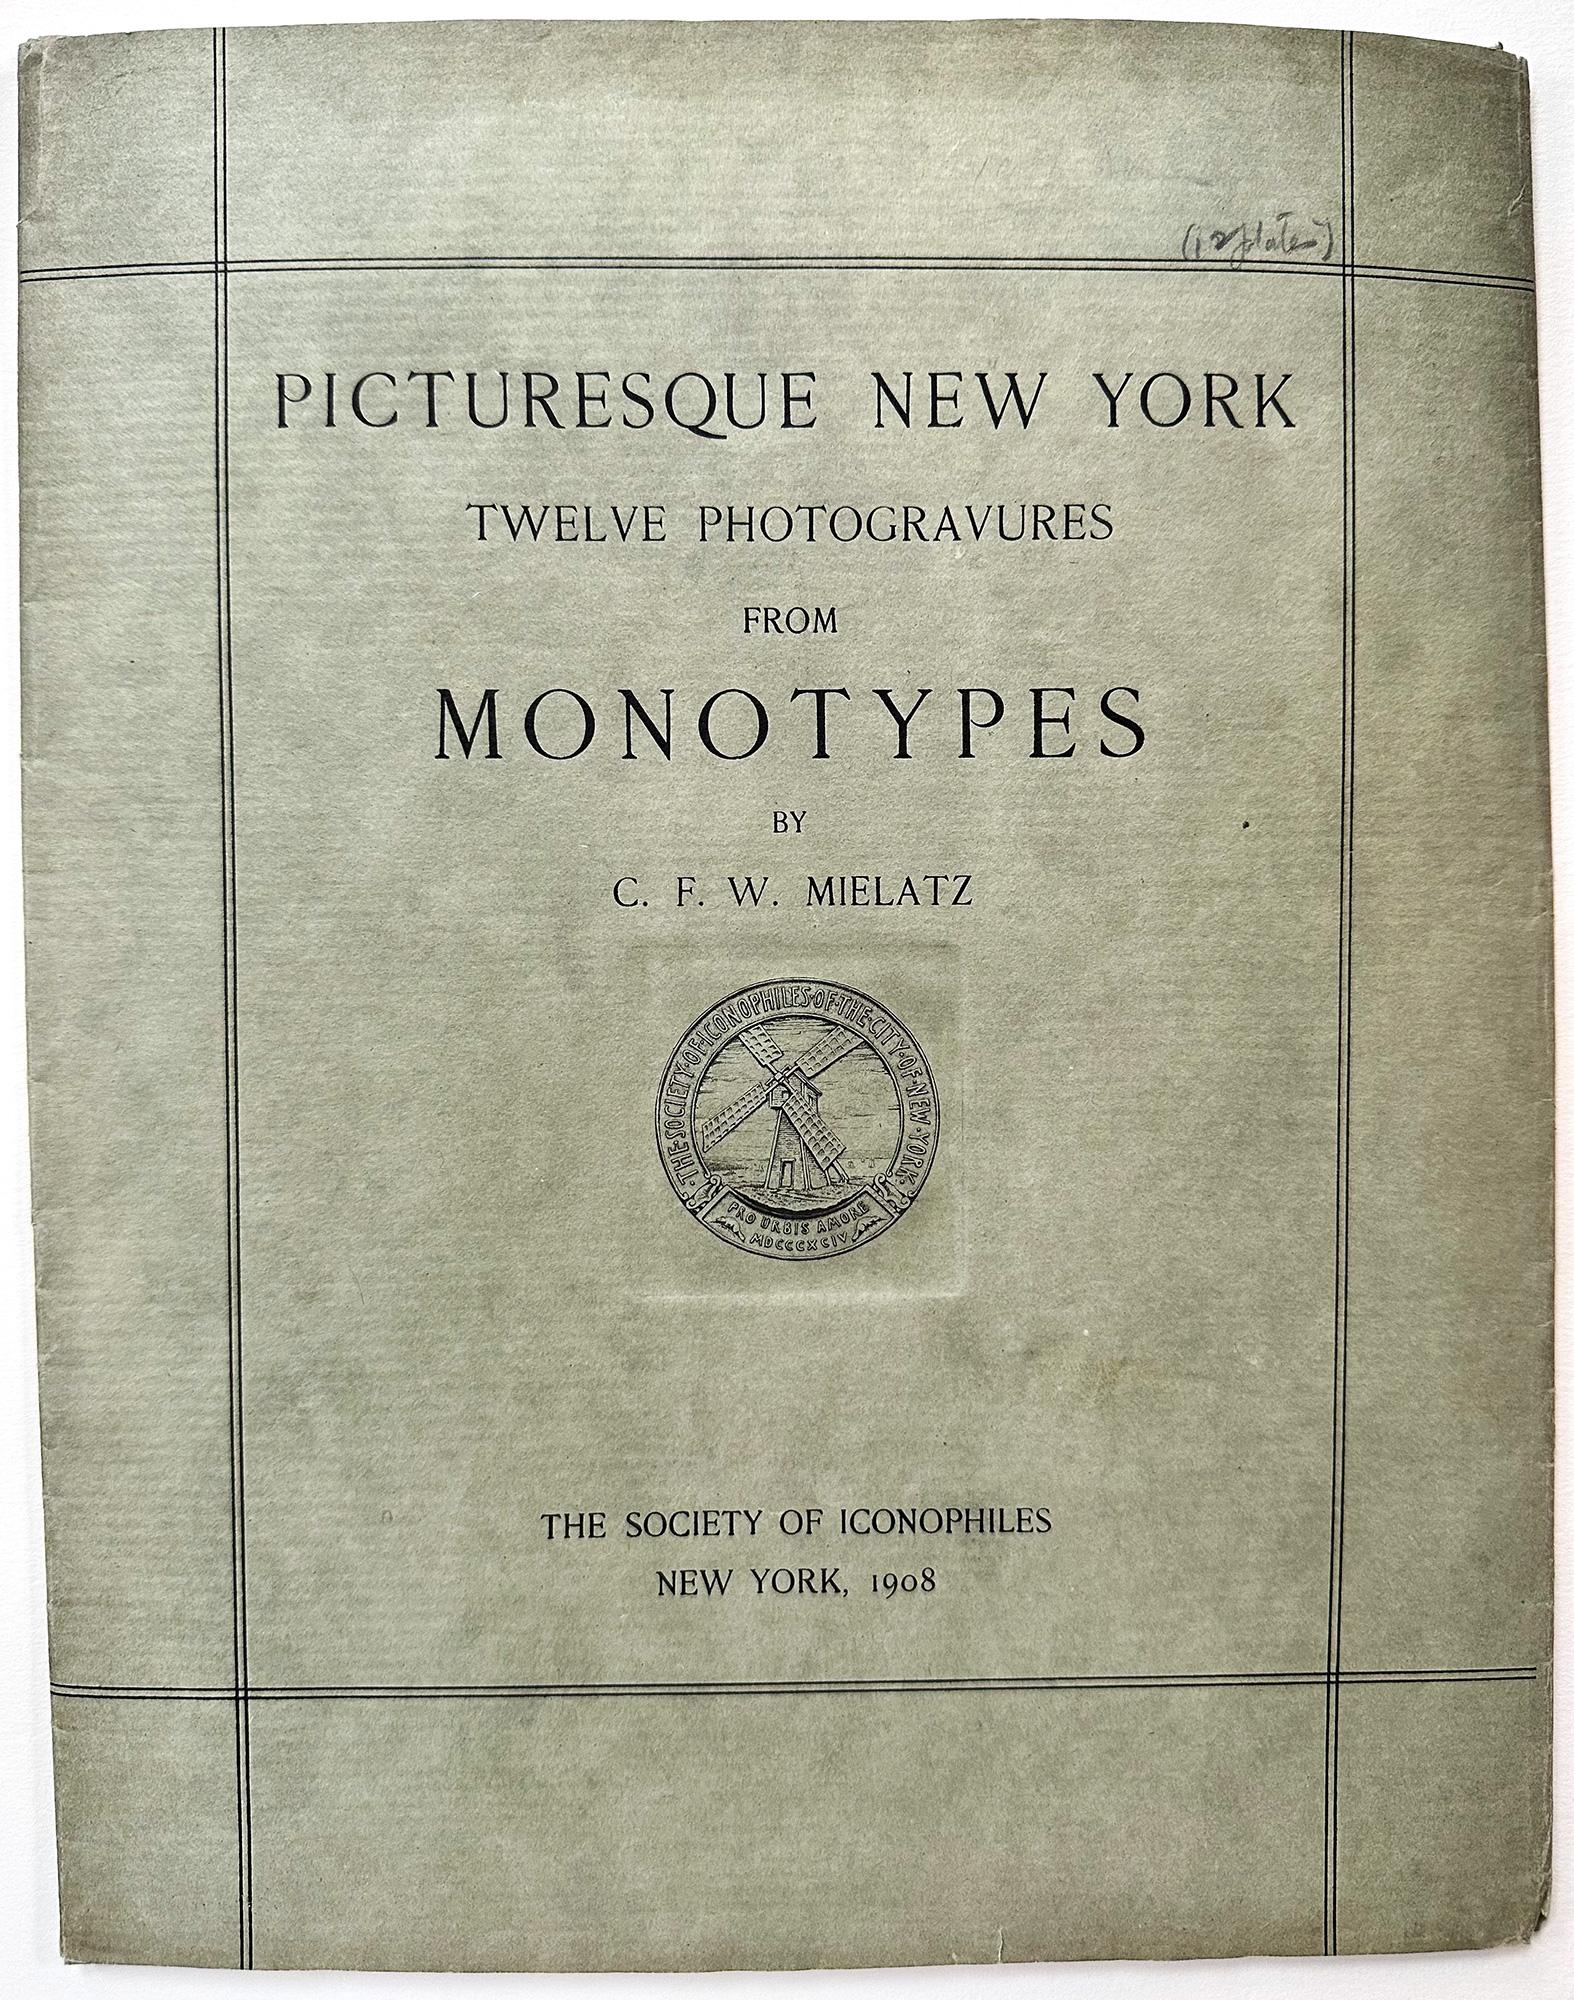 Picturesque New York; Twelve Photogravures from Monotypes - Print by Charles Frederick William Mielatz